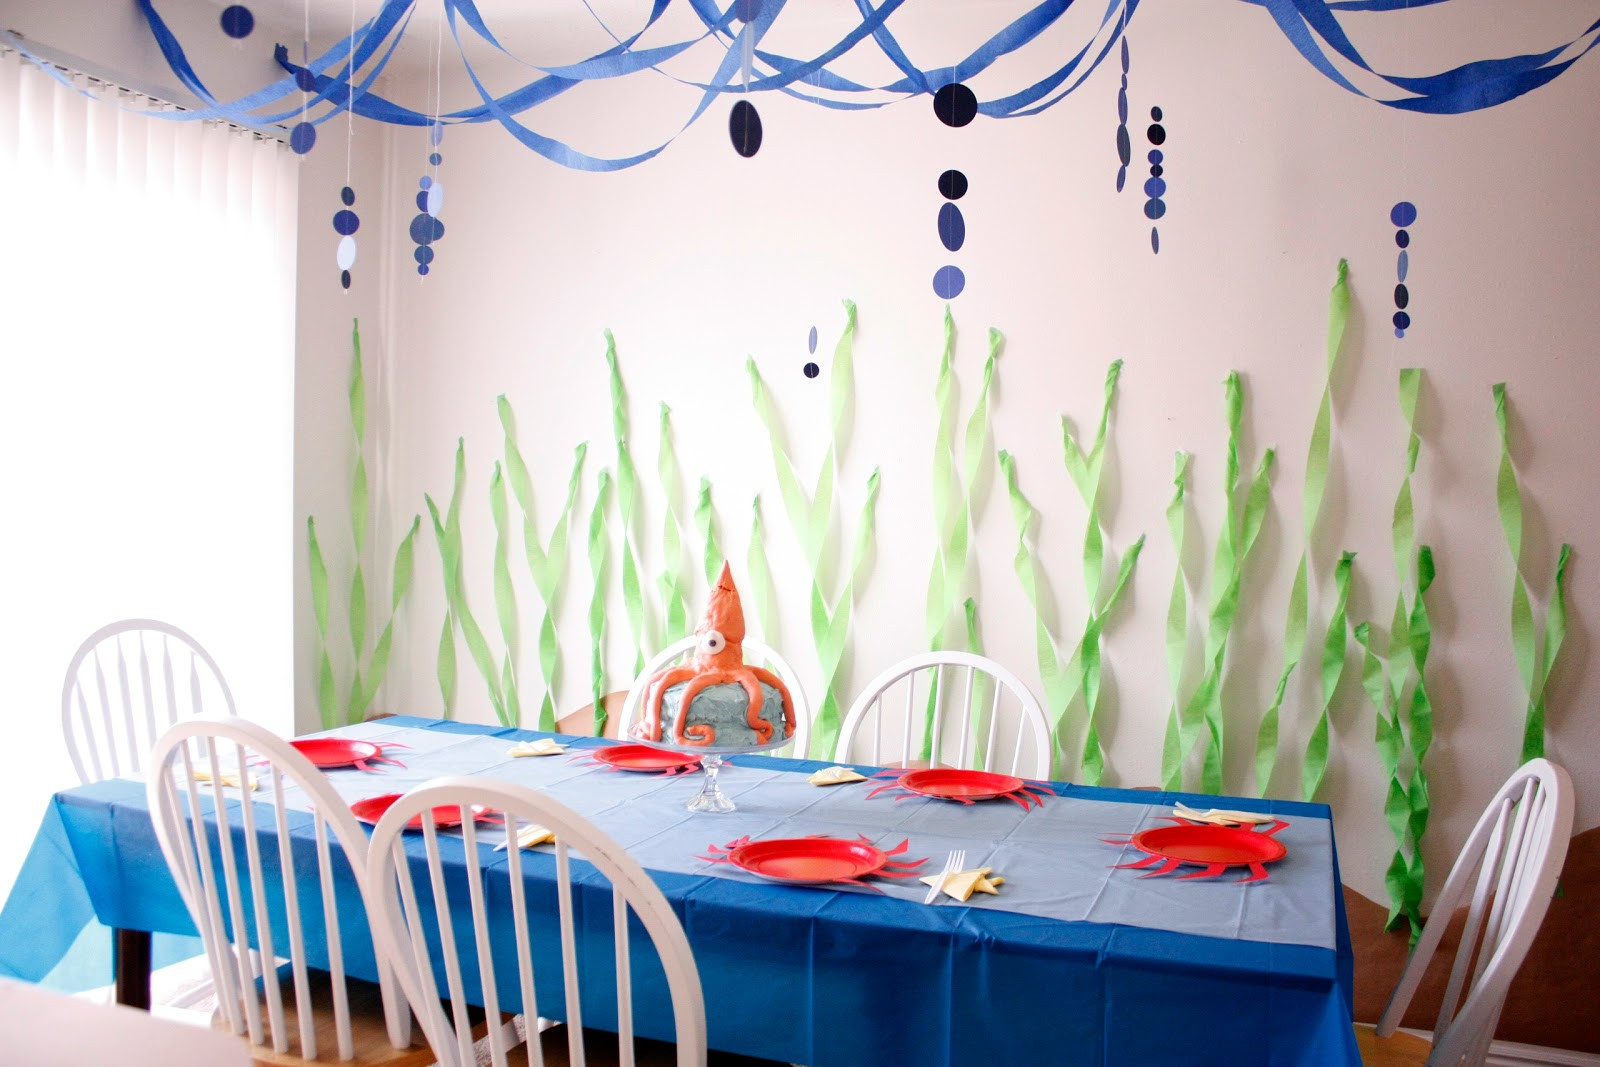 Under The Sea Birthday Decorations
 Under the Sea Birthday Party – Part Two